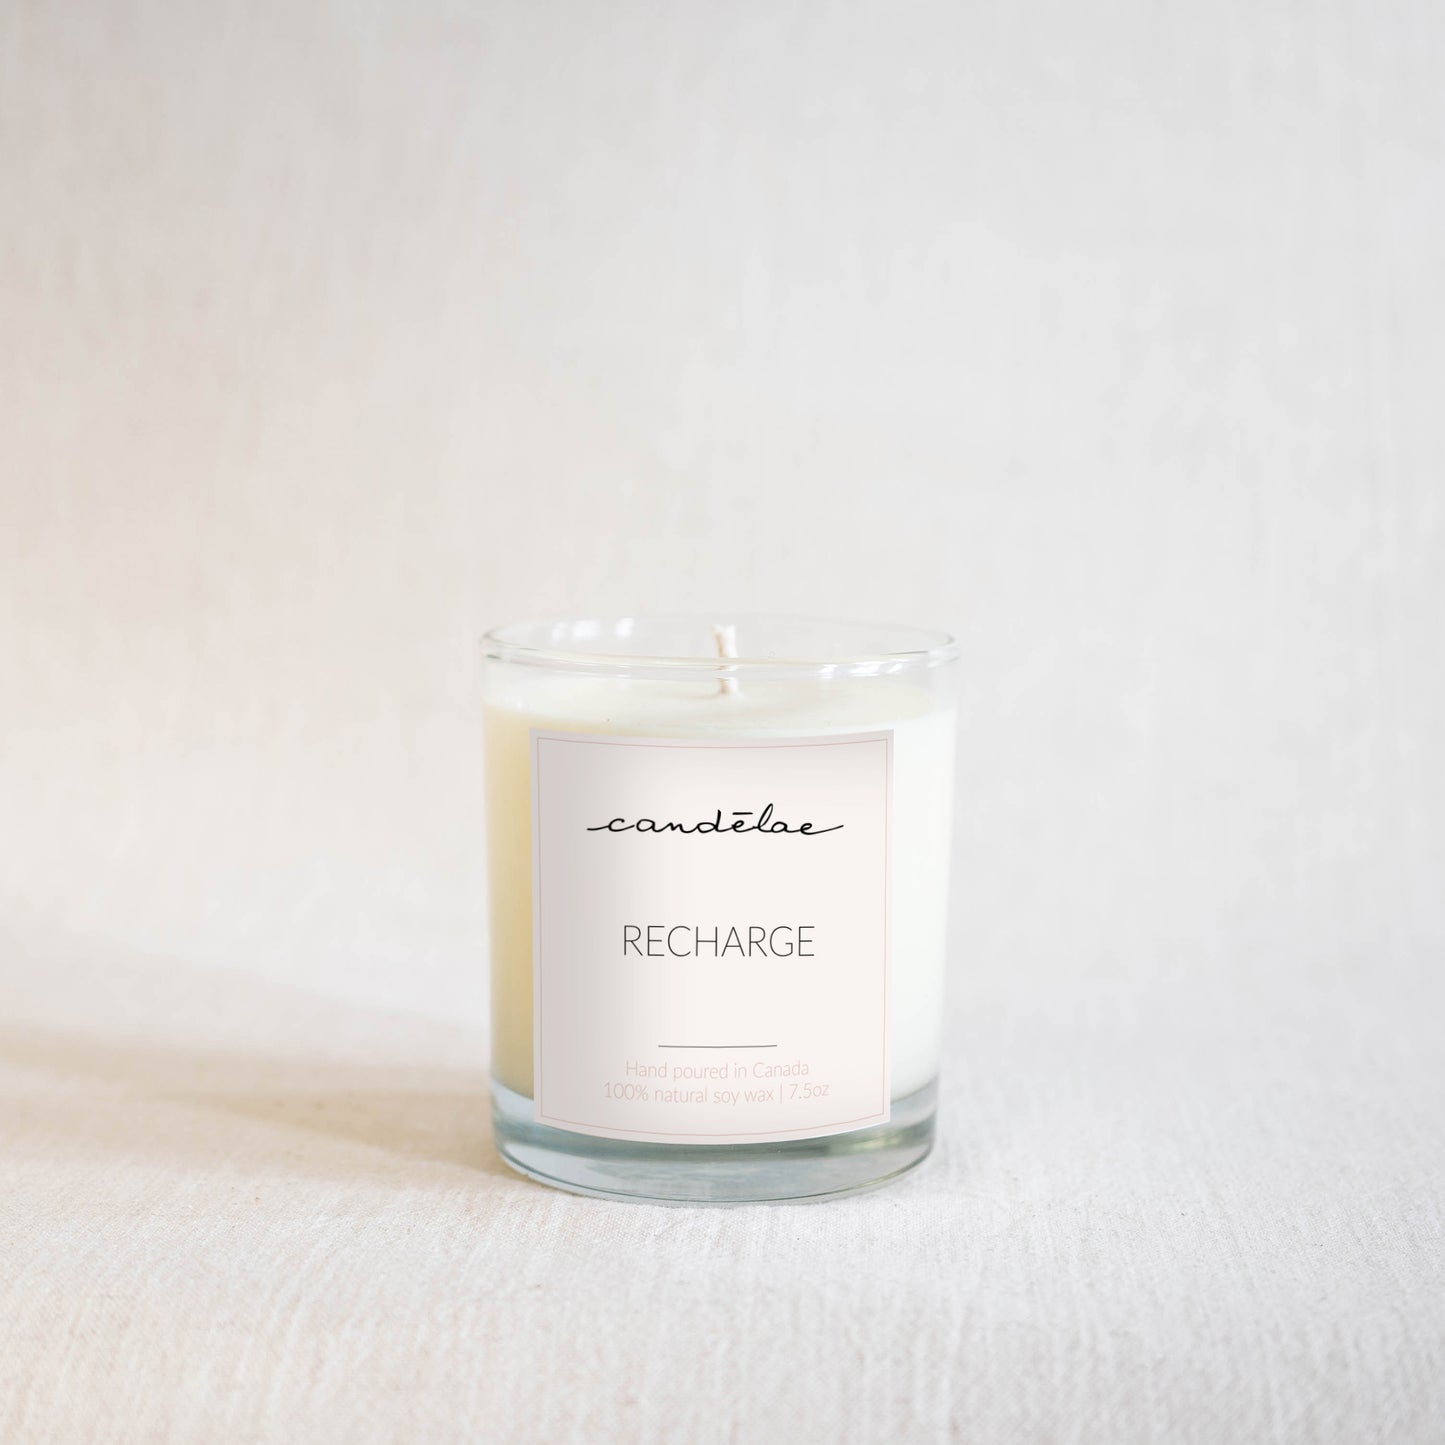 Recharge scented candle by candēlae is ready to be photographed in Toronto, Ontario